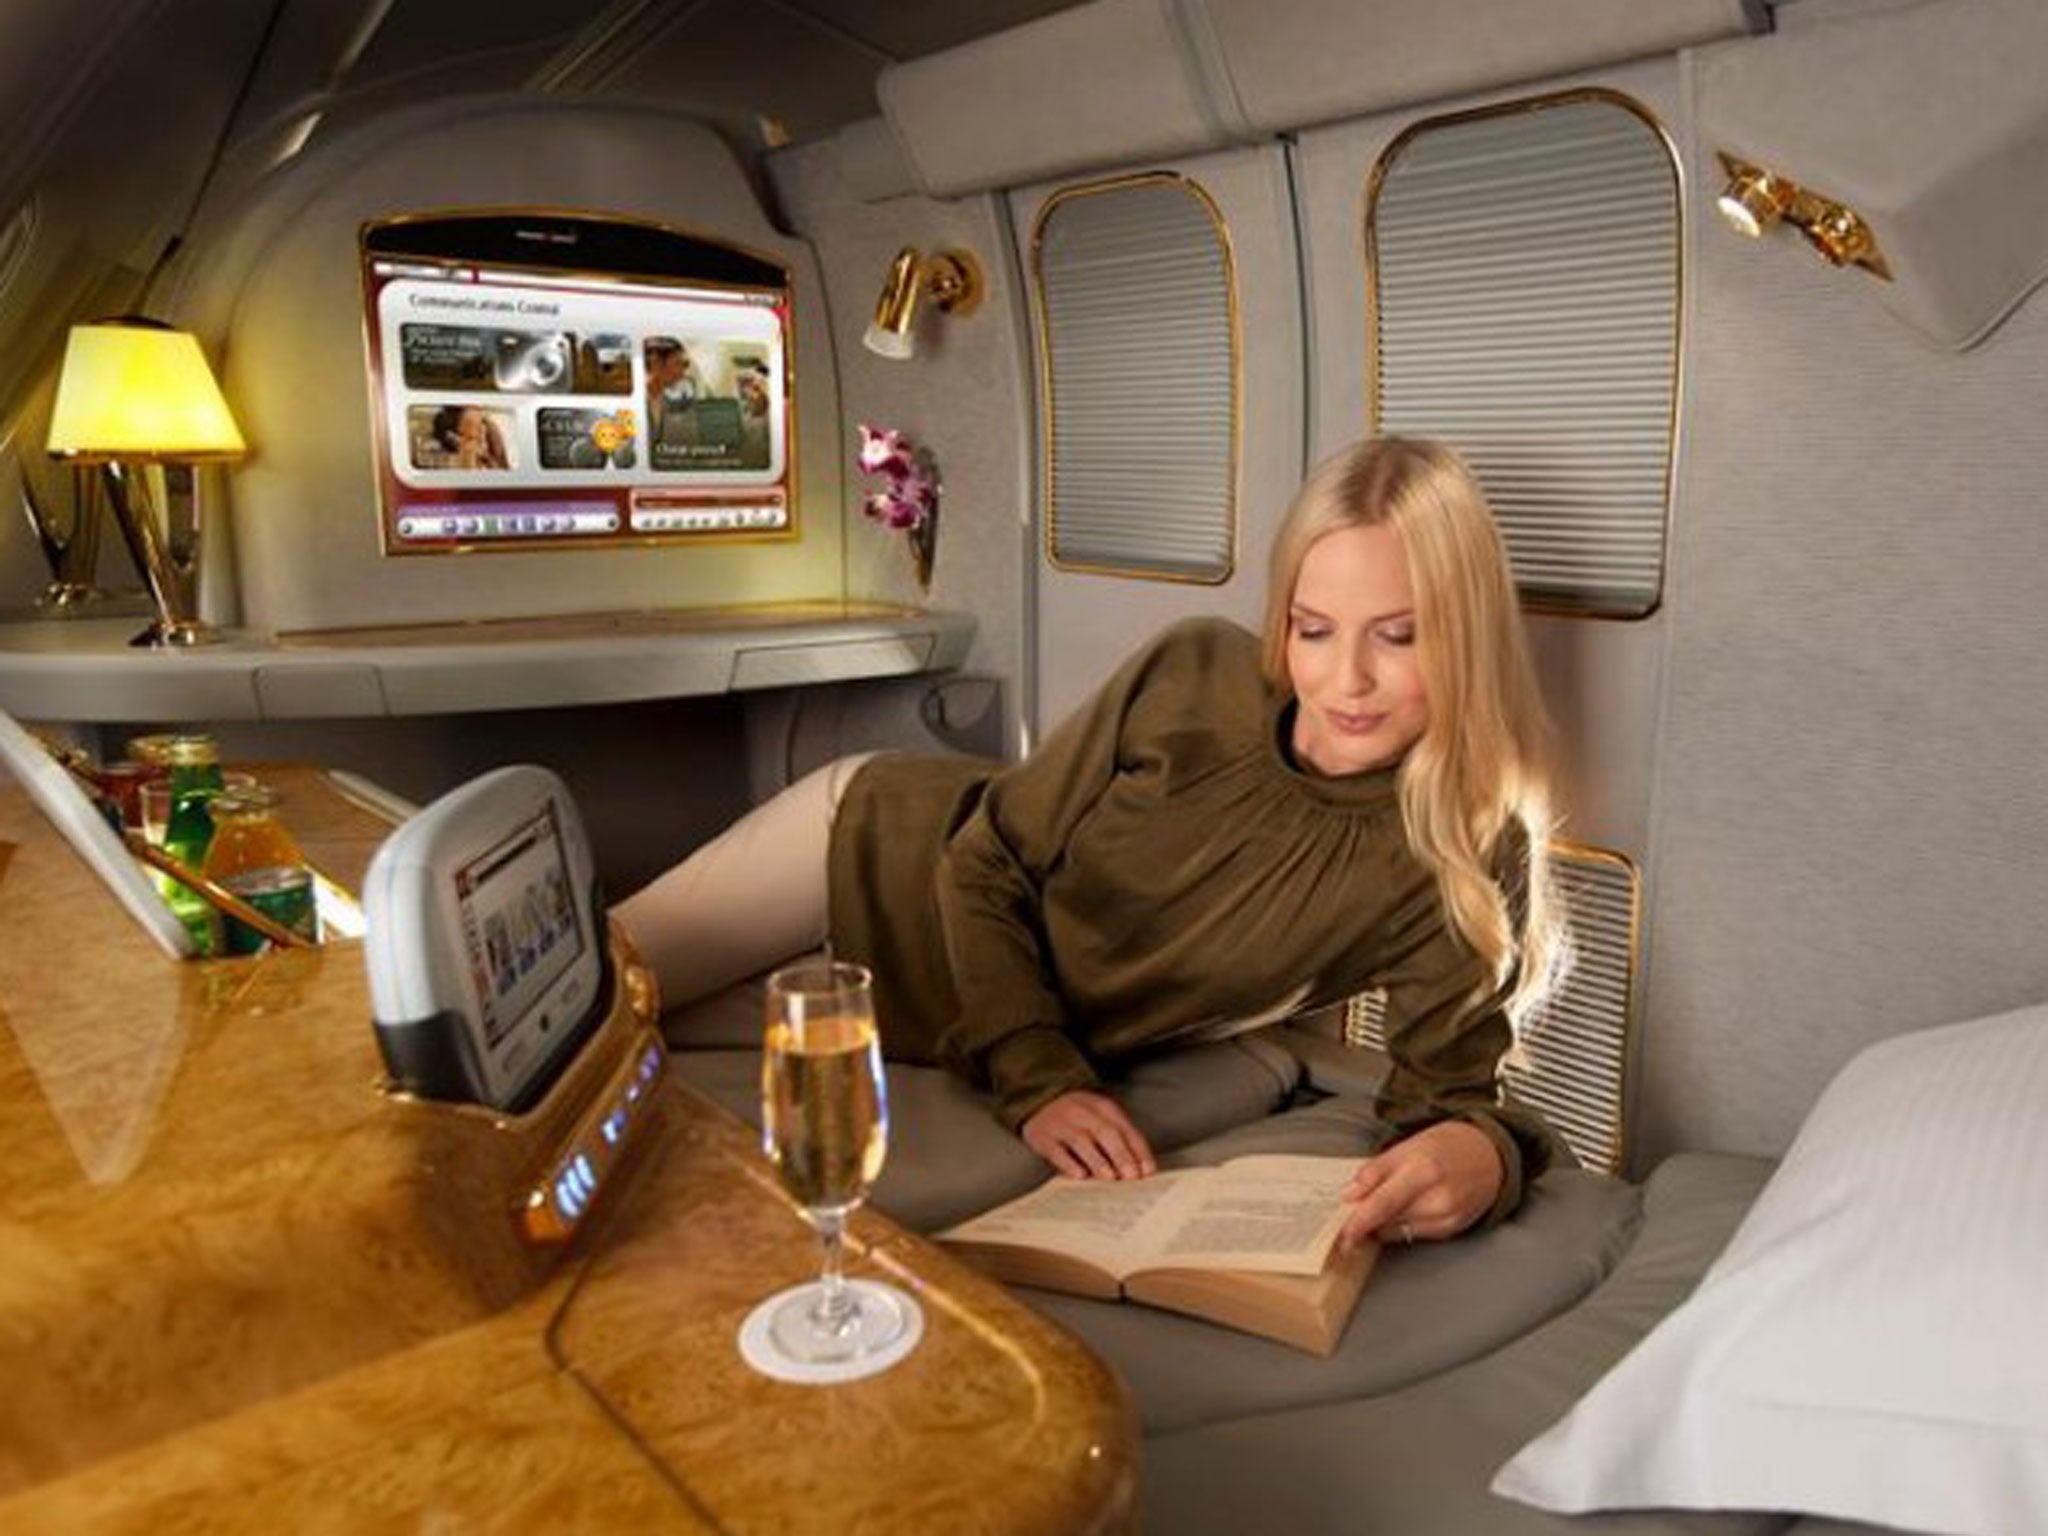 Emirates new B777 First Class Middle Suite 2F with virtual window view |  Cabin interiors, Private jet interior, First class plane